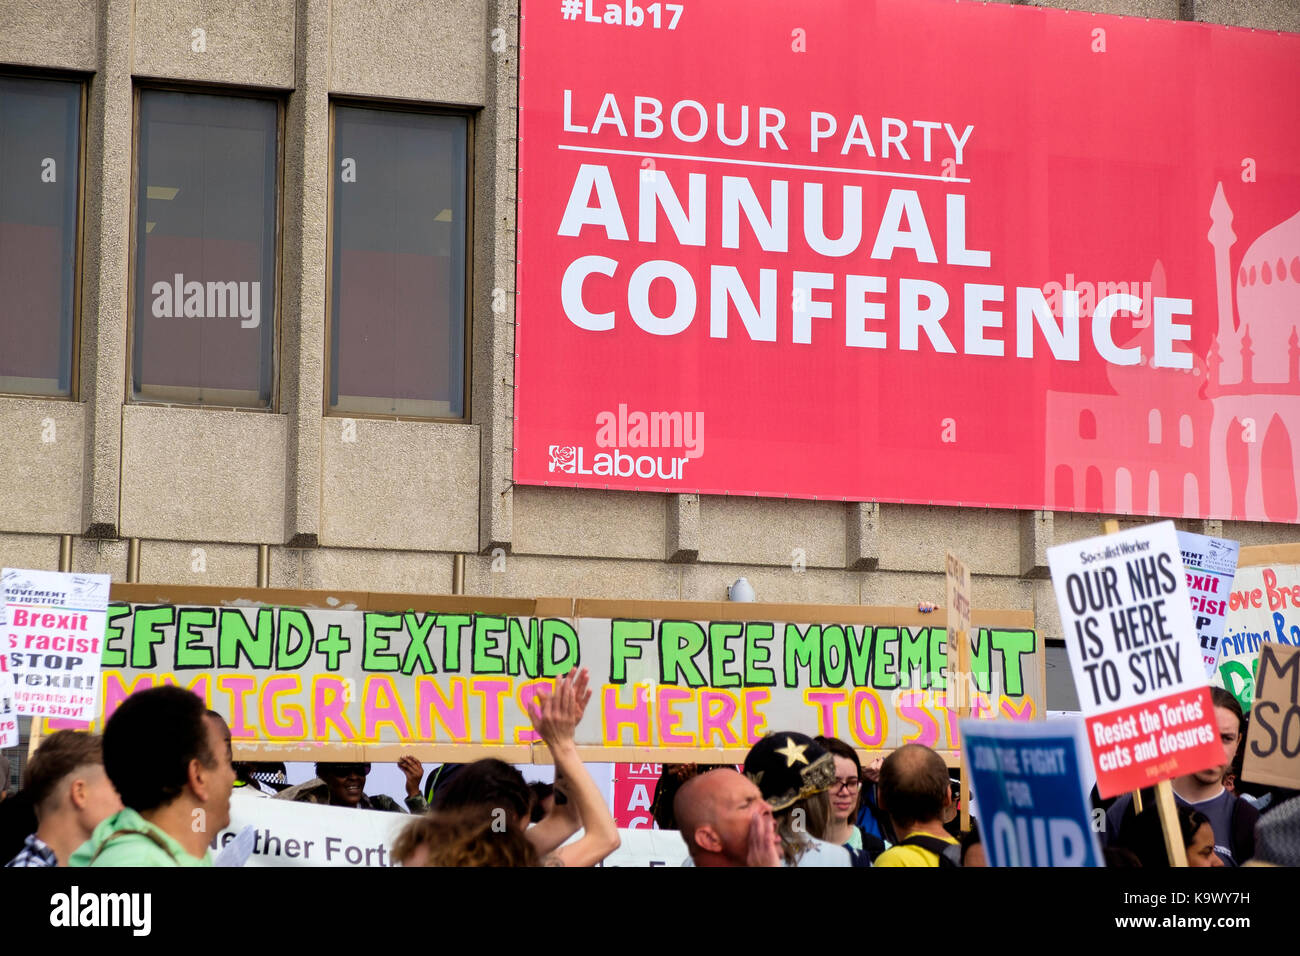 Brighton Centre, Brighton, UK - 24 September 2017: Protestors in a demonstration organised by the Movement for Justice demanding the free movement of people post Brexit are joined by protesters from a larger pro-NHS demonstration outside the venue of the Labour Party Conference 2017. Credit: Scott Hortop/Alamy Live News Stock Photo